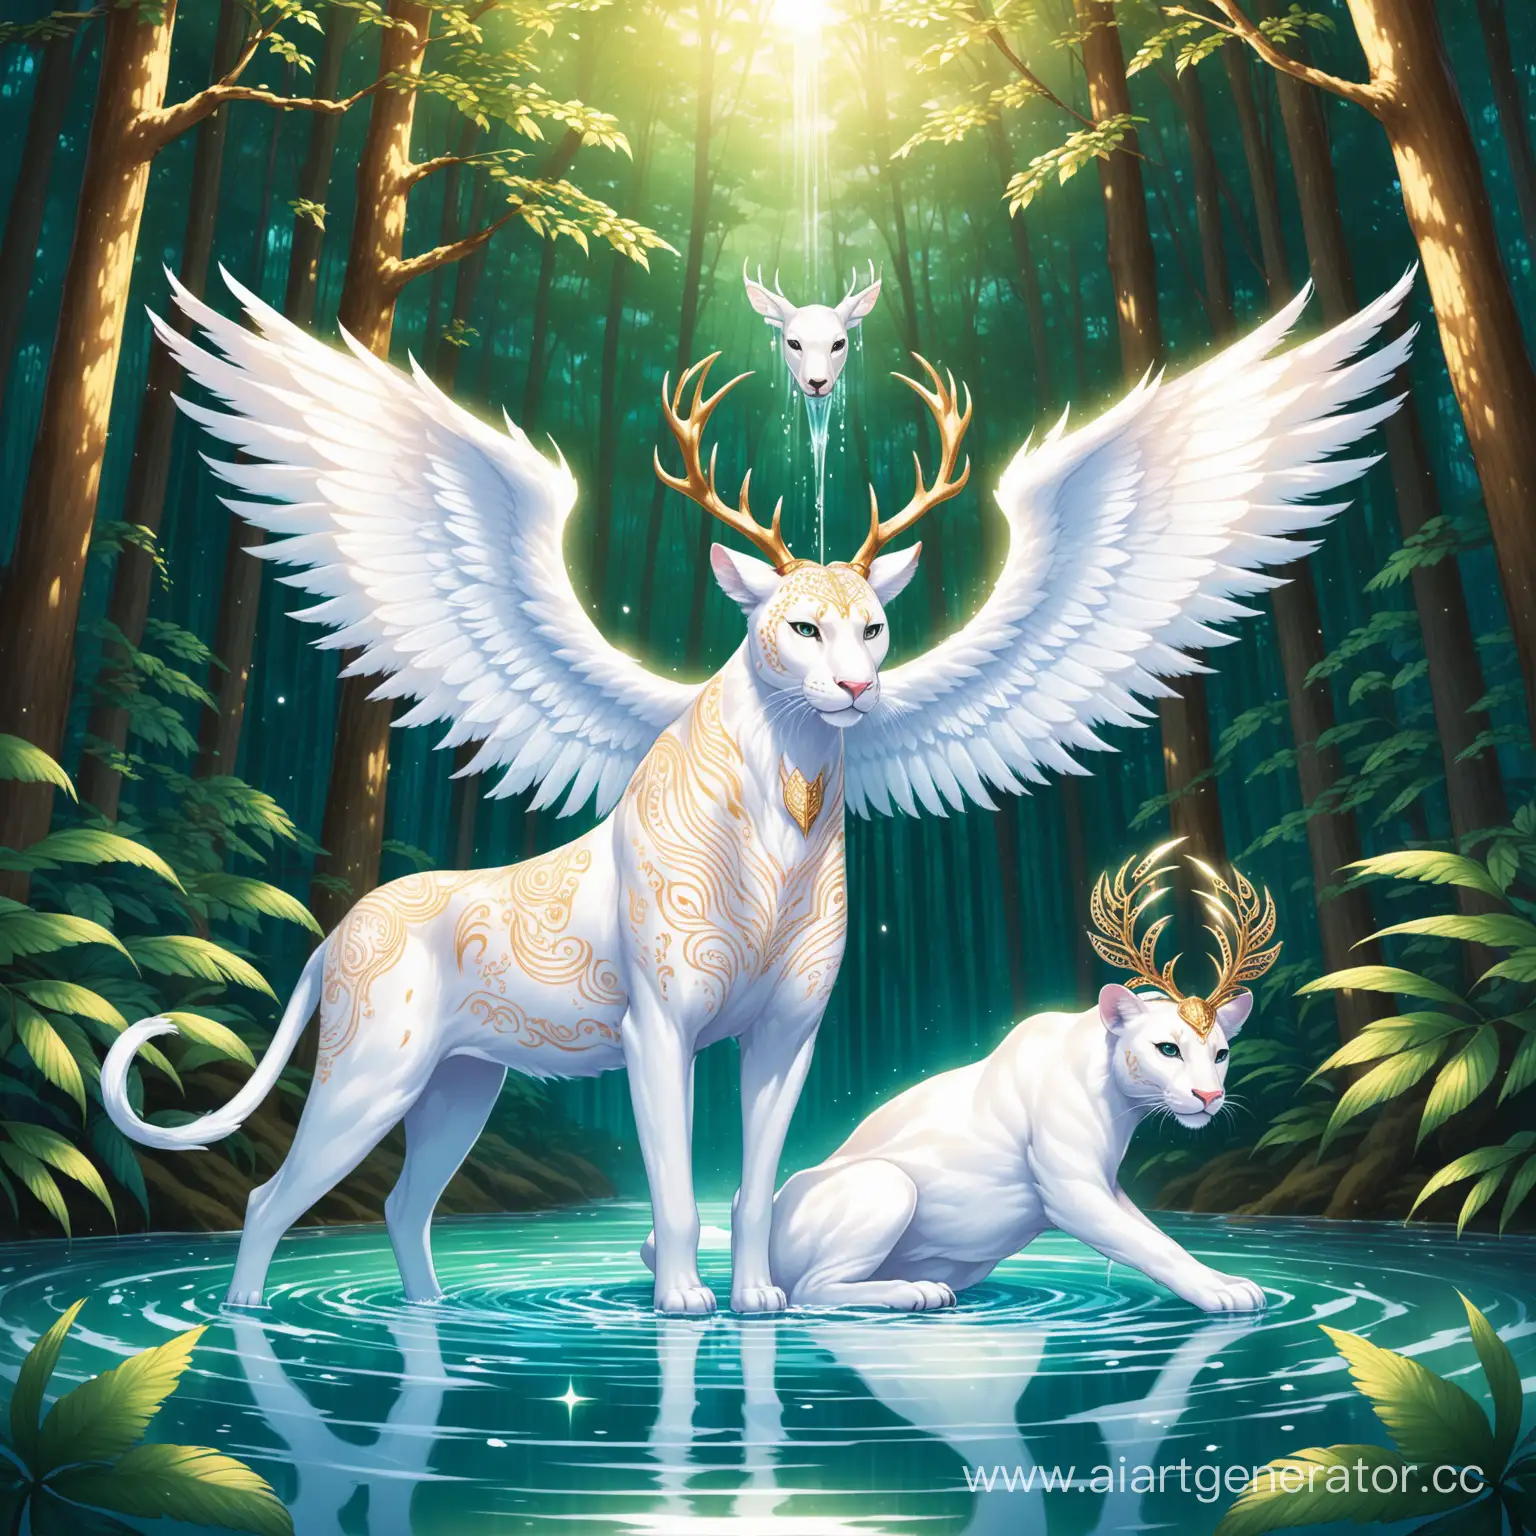 Elegant-Albino-Sacred-Animal-with-Six-PantherPatterned-Wings-Drinking-Water-in-Forest